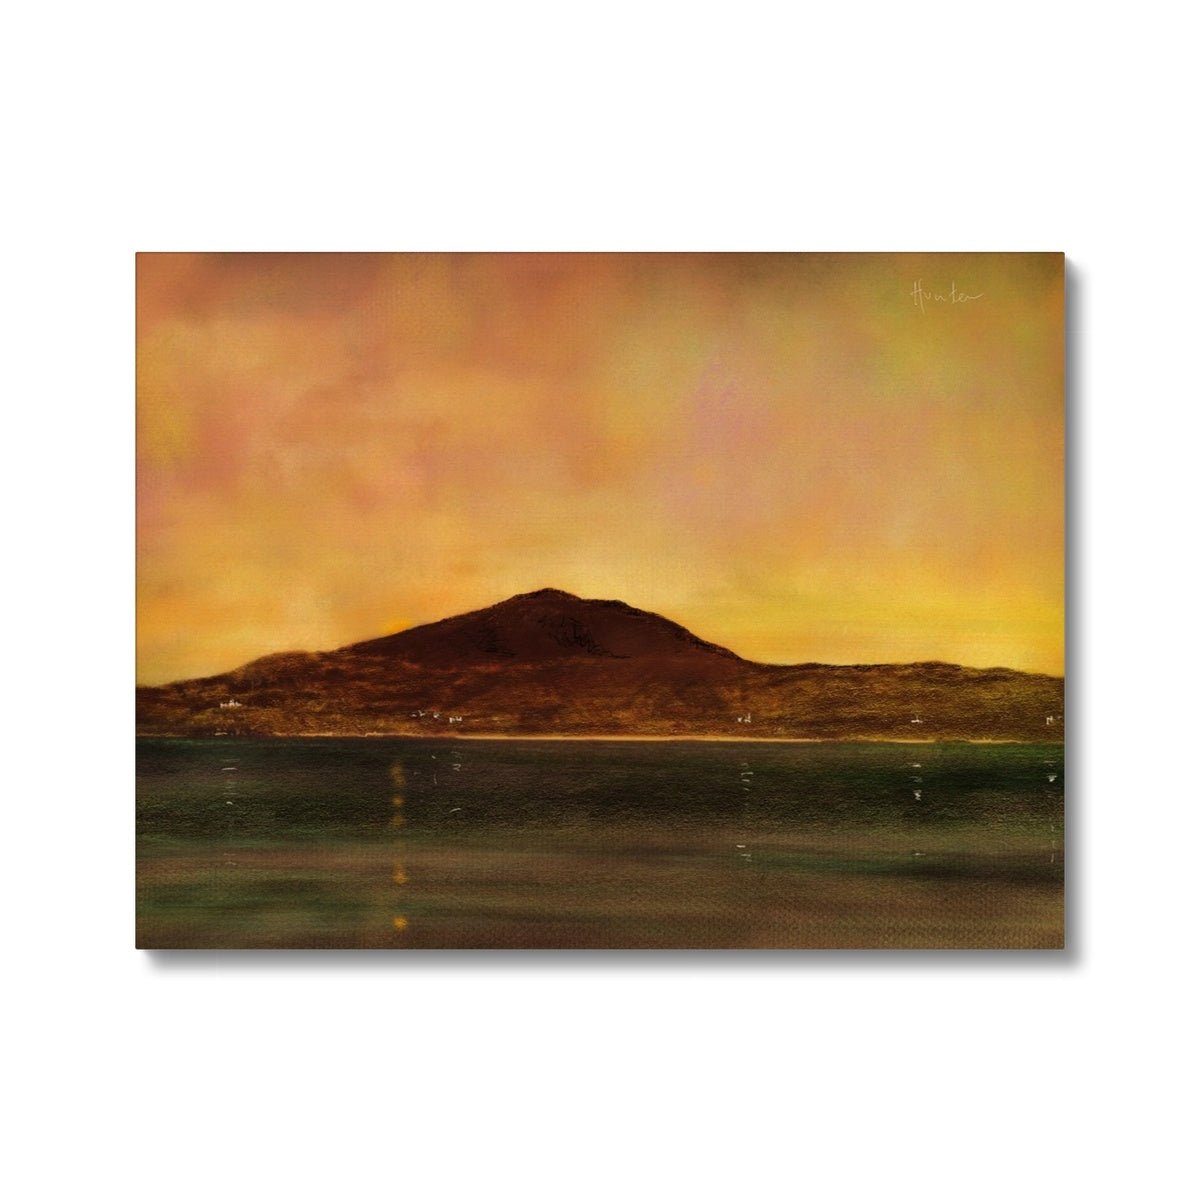 Eriskay Dusk Painting | Canvas From Scotland-Contemporary Stretched Canvas Prints-Hebridean Islands Art Gallery-24"x18"-Paintings, Prints, Homeware, Art Gifts From Scotland By Scottish Artist Kevin Hunter